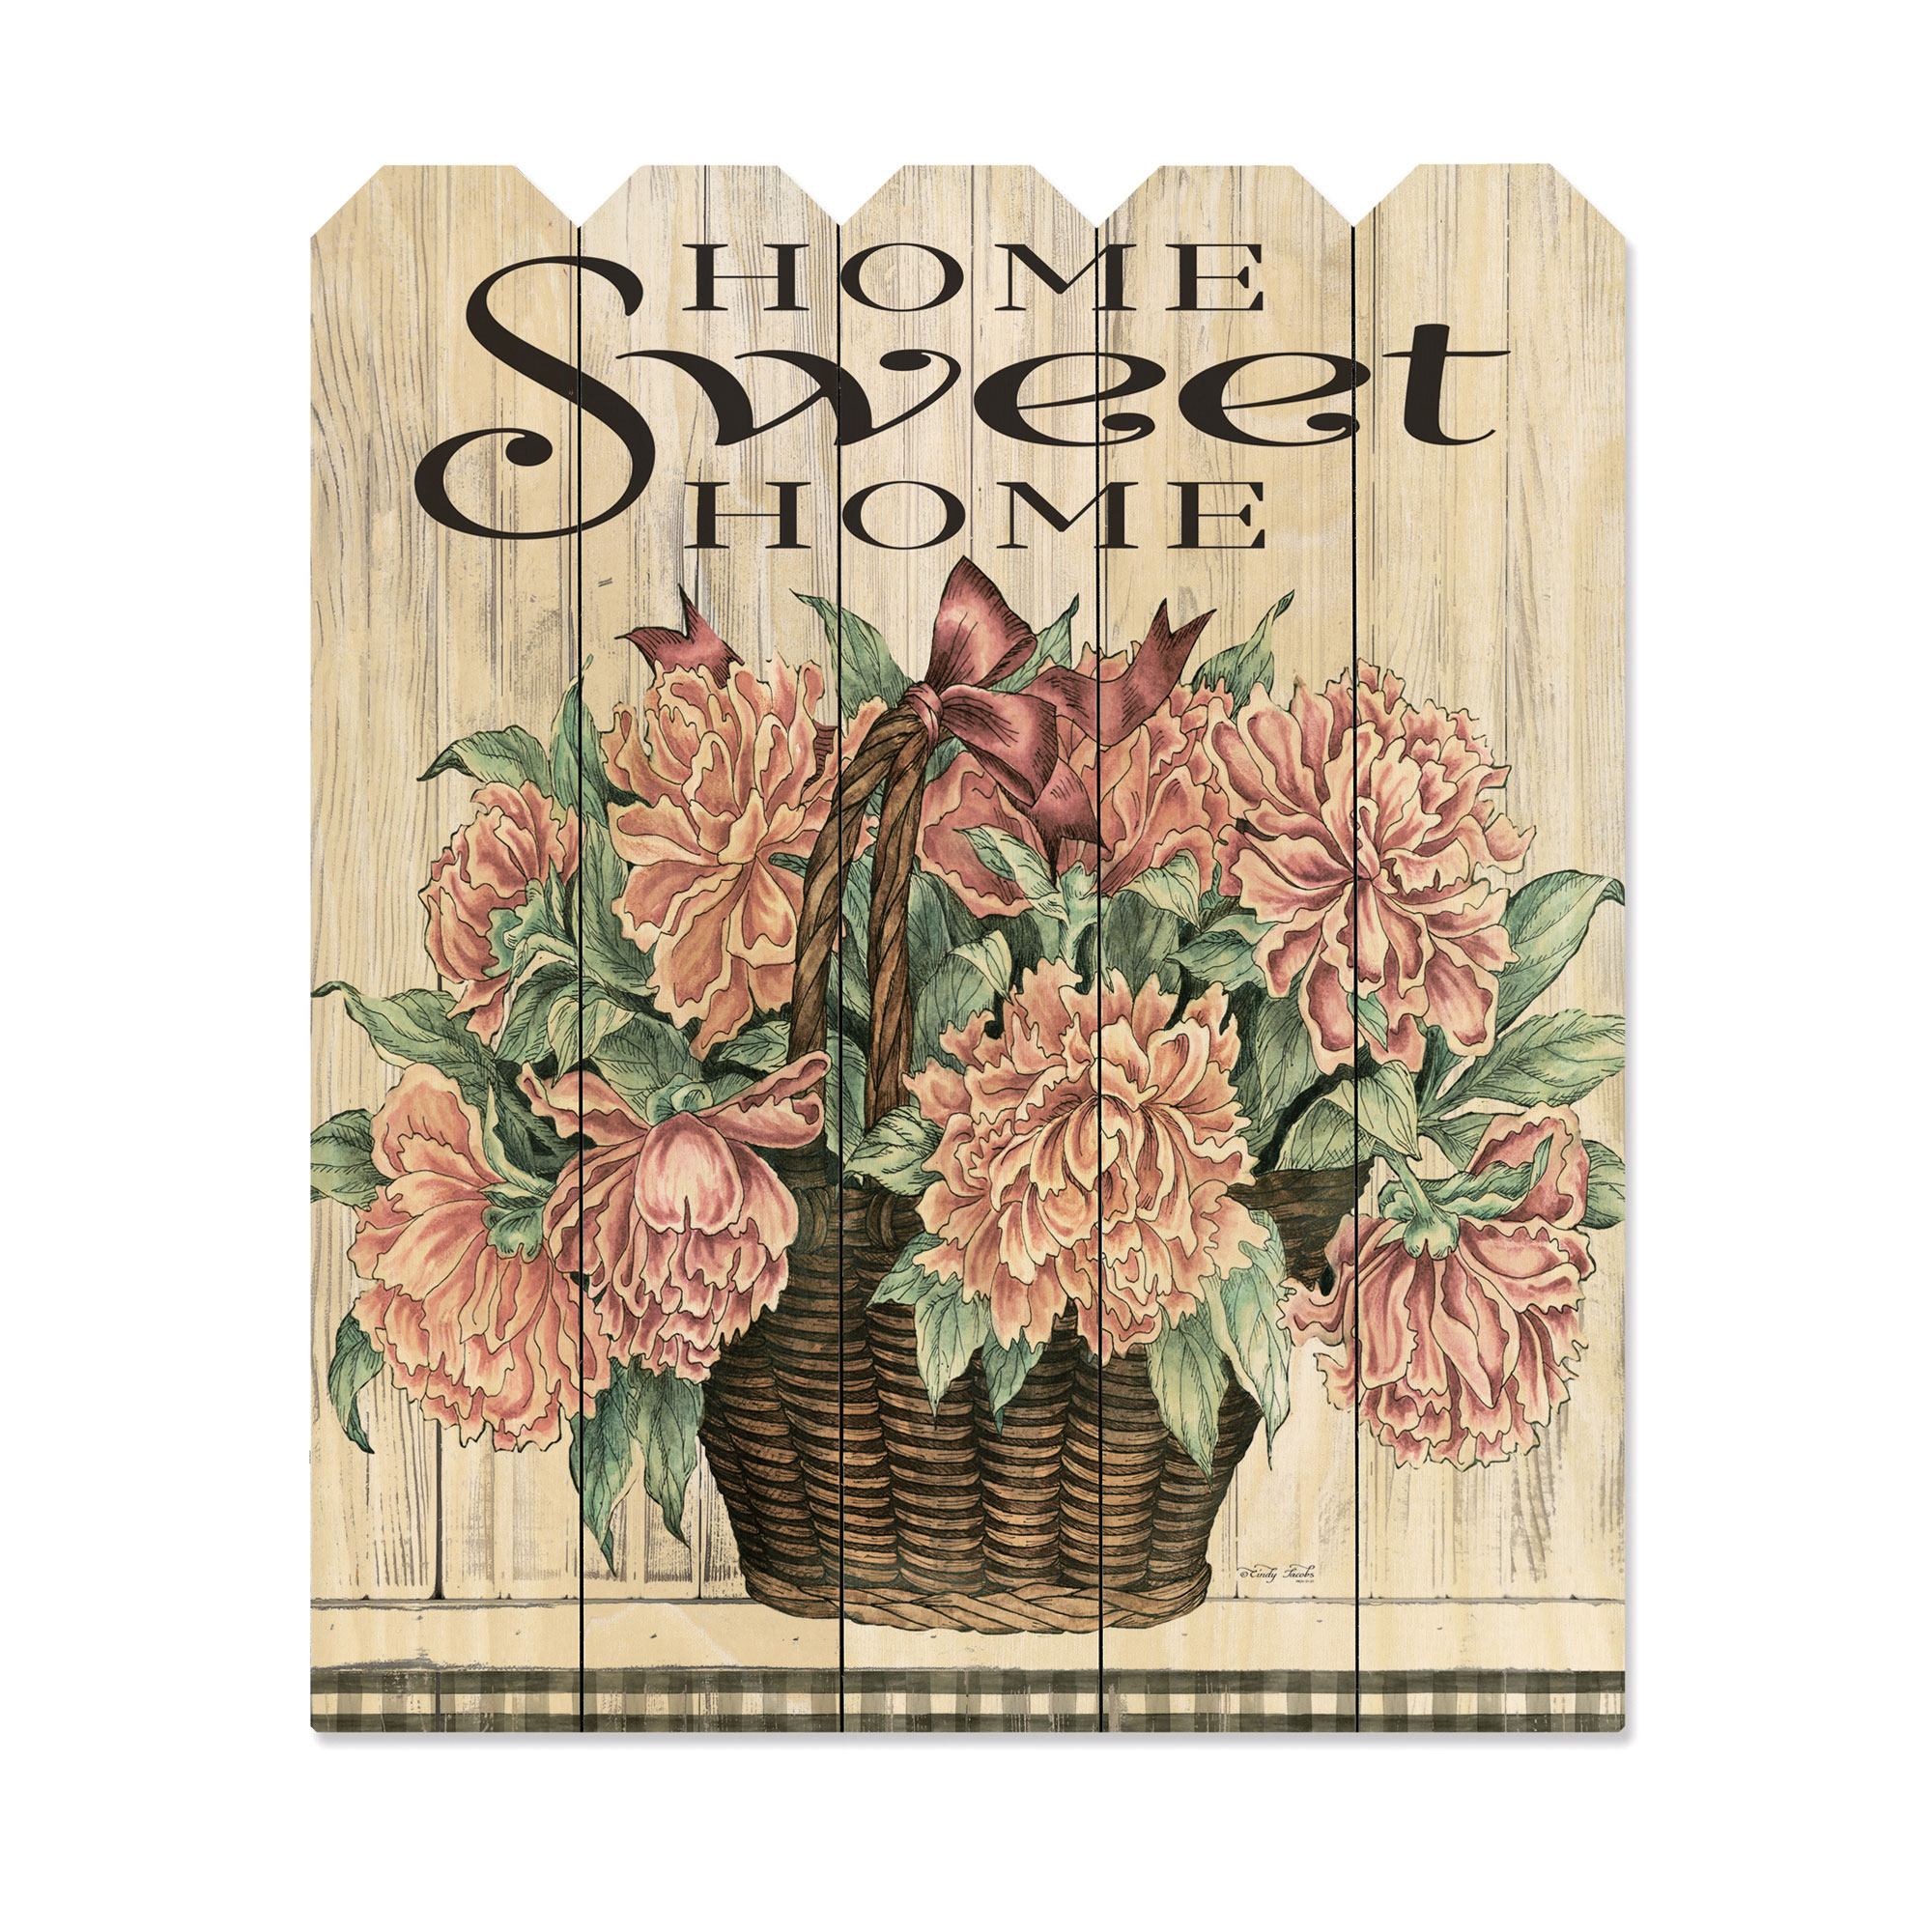 "Home Sweet Home Peonies" By Artisan Cindy Jacobs, Printed on Wooden Picket Fence Wall Art